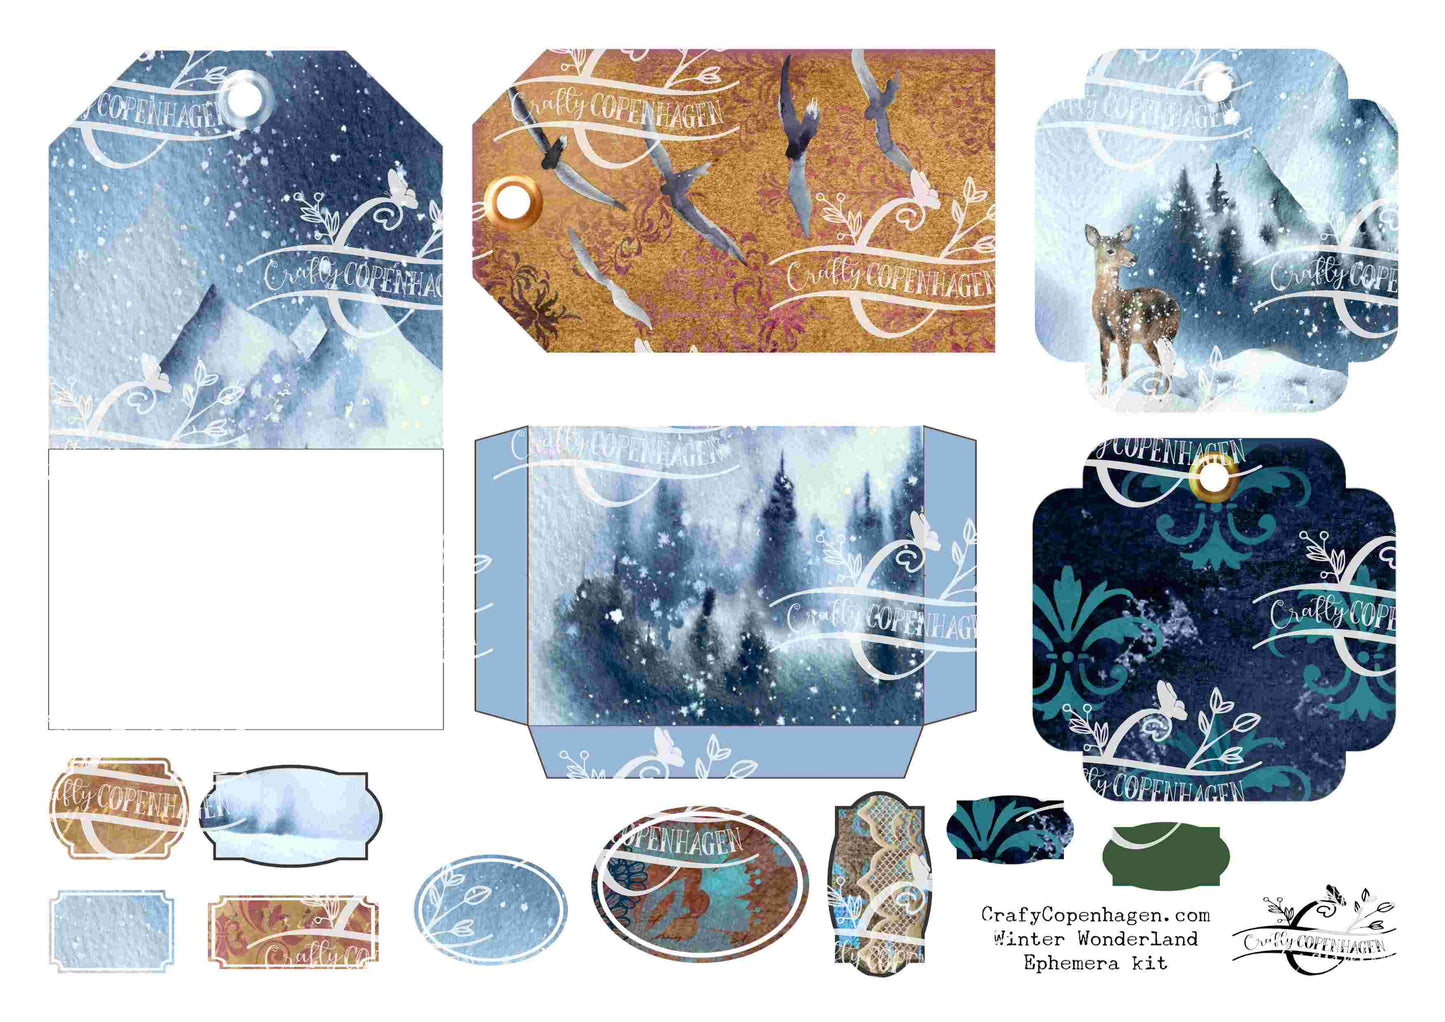 Winter Wonderland Ephemera Kit - 80+ Elements on 10 Pages for Instant Download & Print, Cozy Snow, Deer, Owls, Birds, Lace, Tags, Fussy cuts